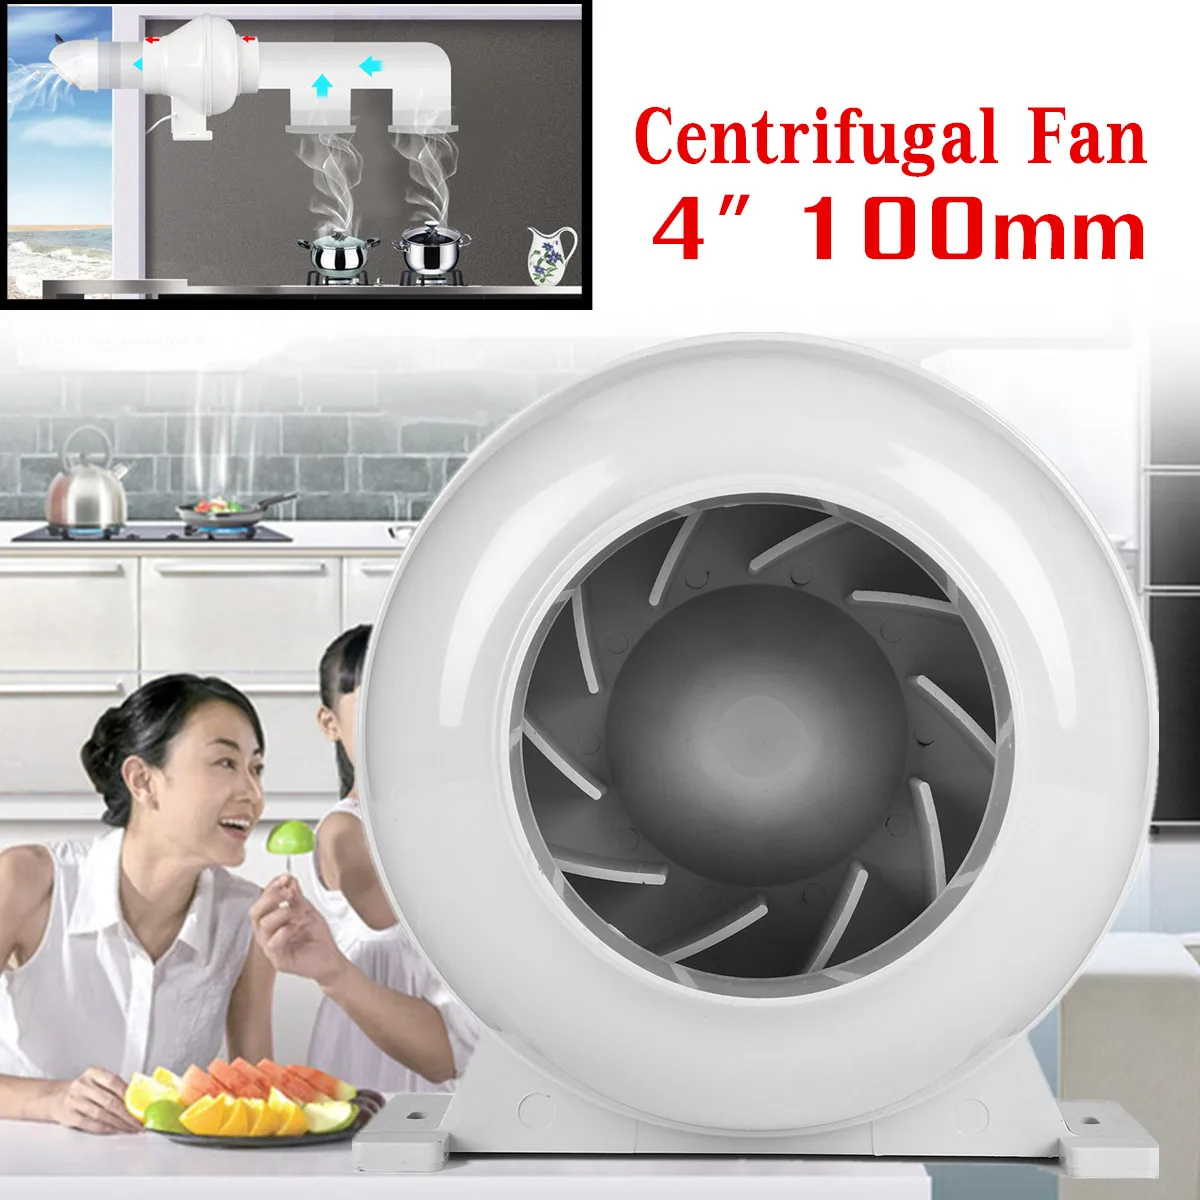 

4 Inch 100mm In Line Powerful Pipeline Centrifugal Fan Kitchen Duct Exhaust Blower Energy-saving Mute Overheating Protection